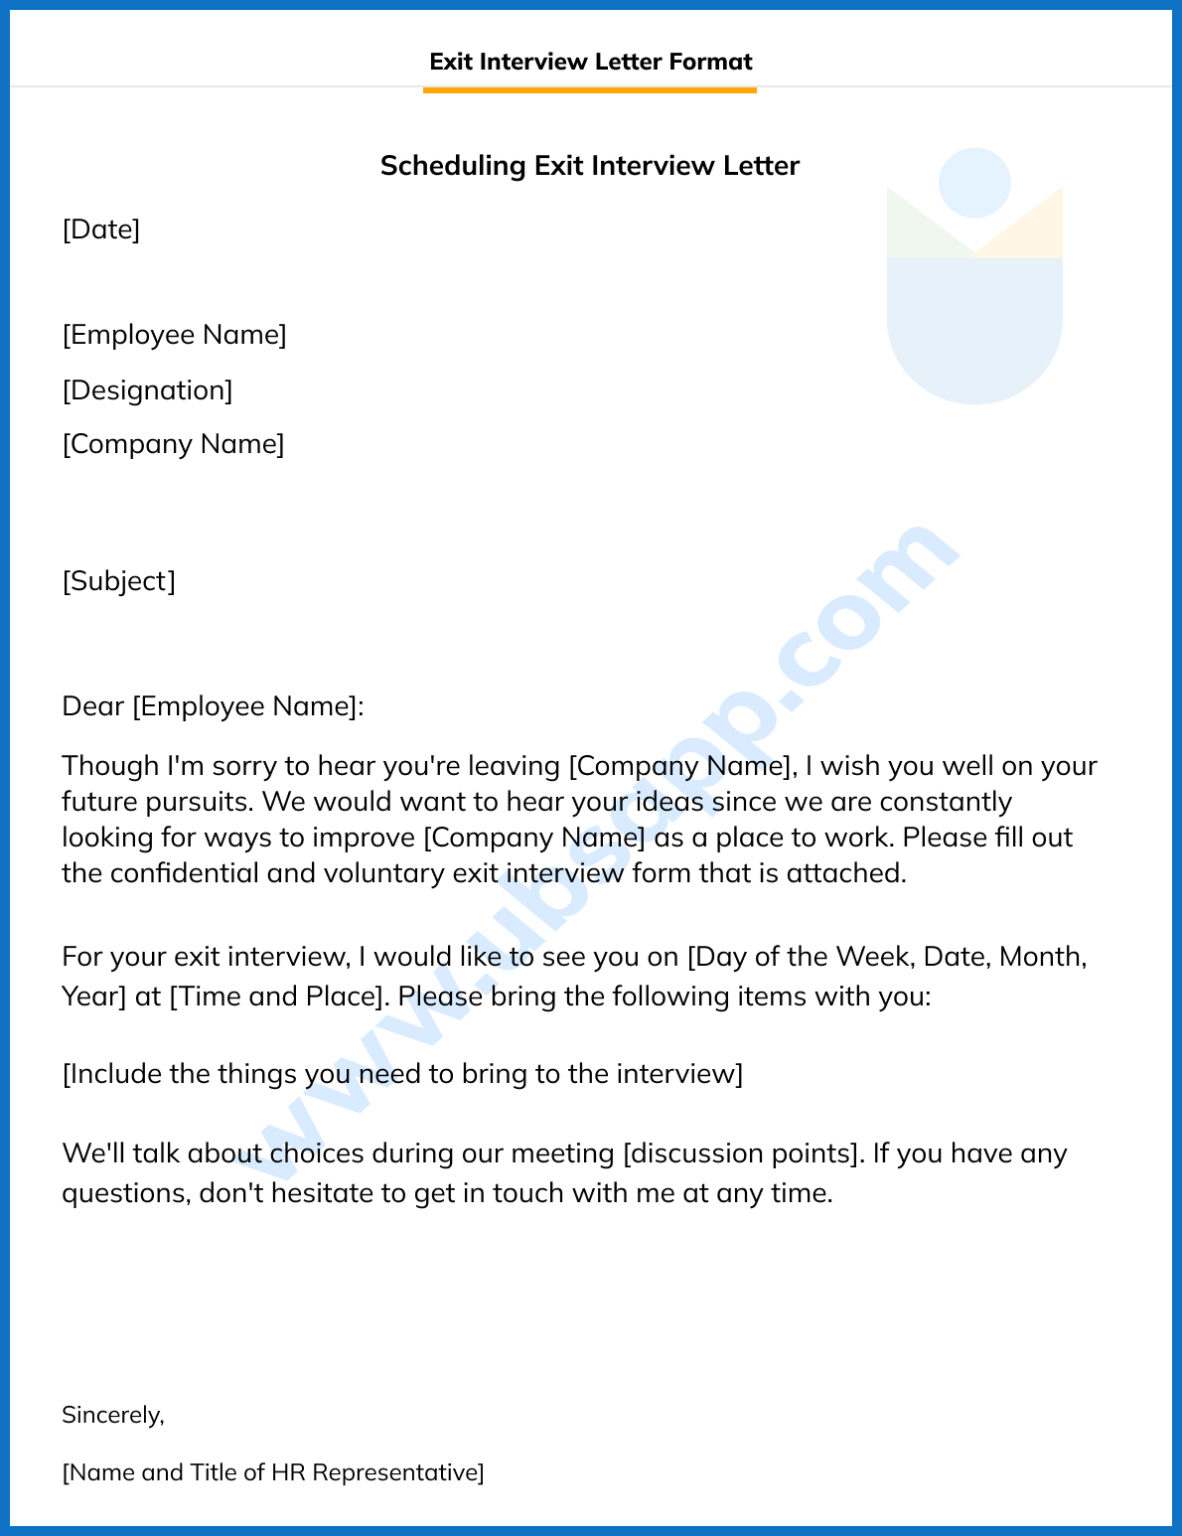 Exit Interview Letter Format Definition ToDo Examples and More UBS